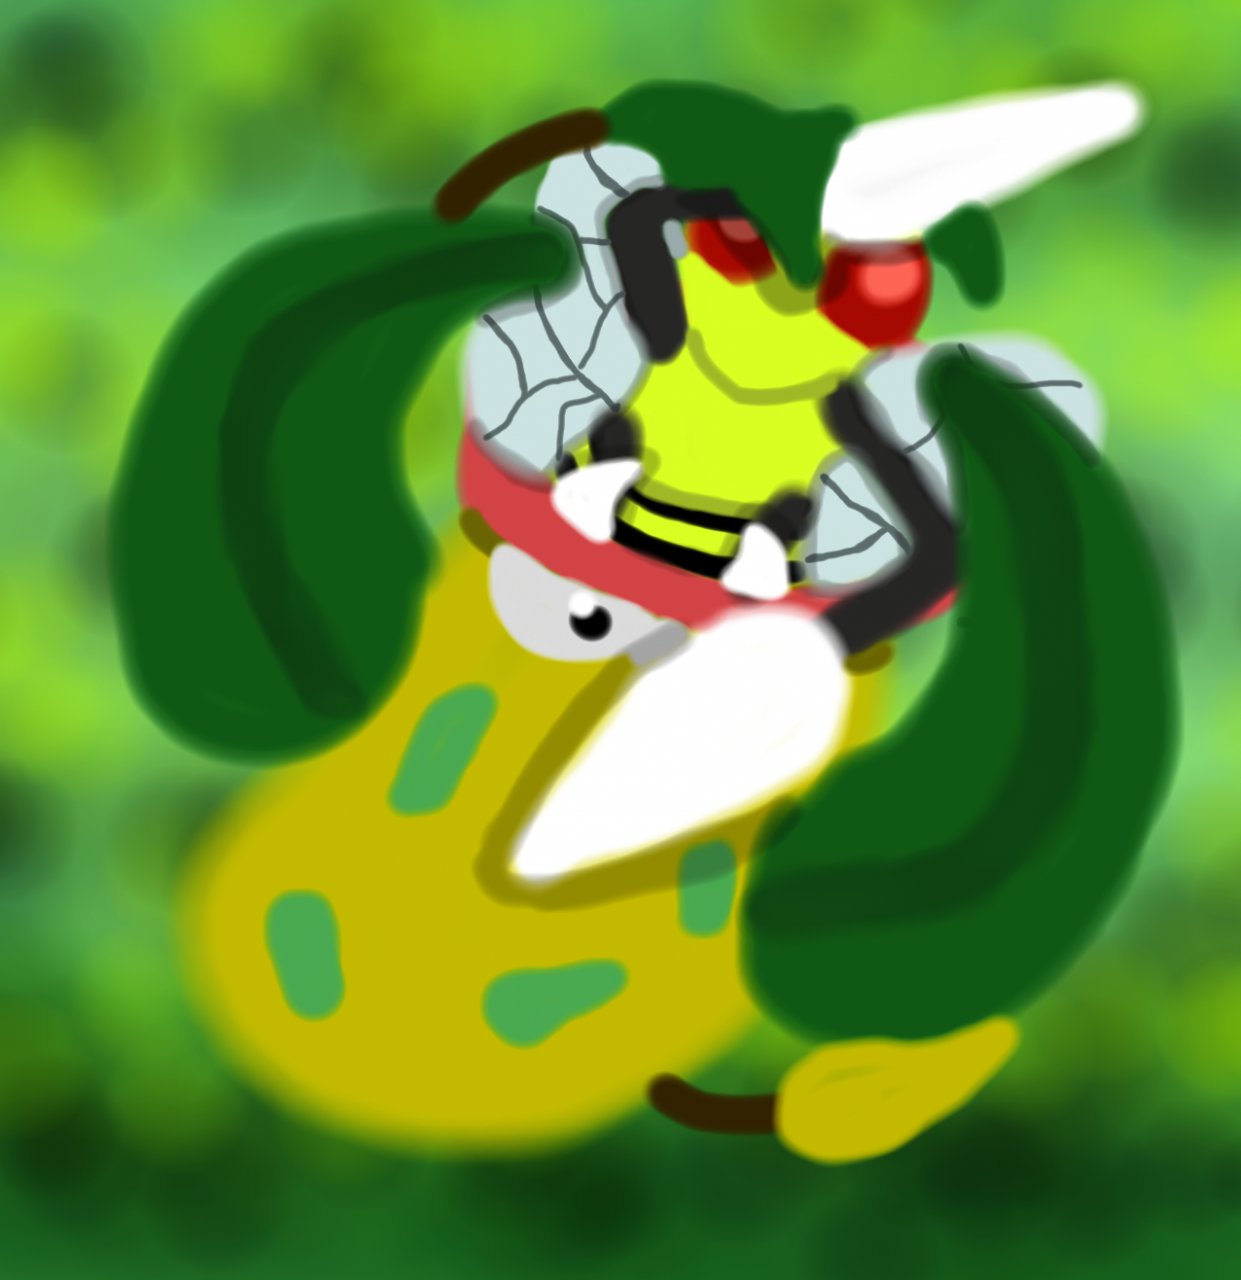 There is no vore story. Leaf has a Victreebel now. by hyhyd on DeviantArt